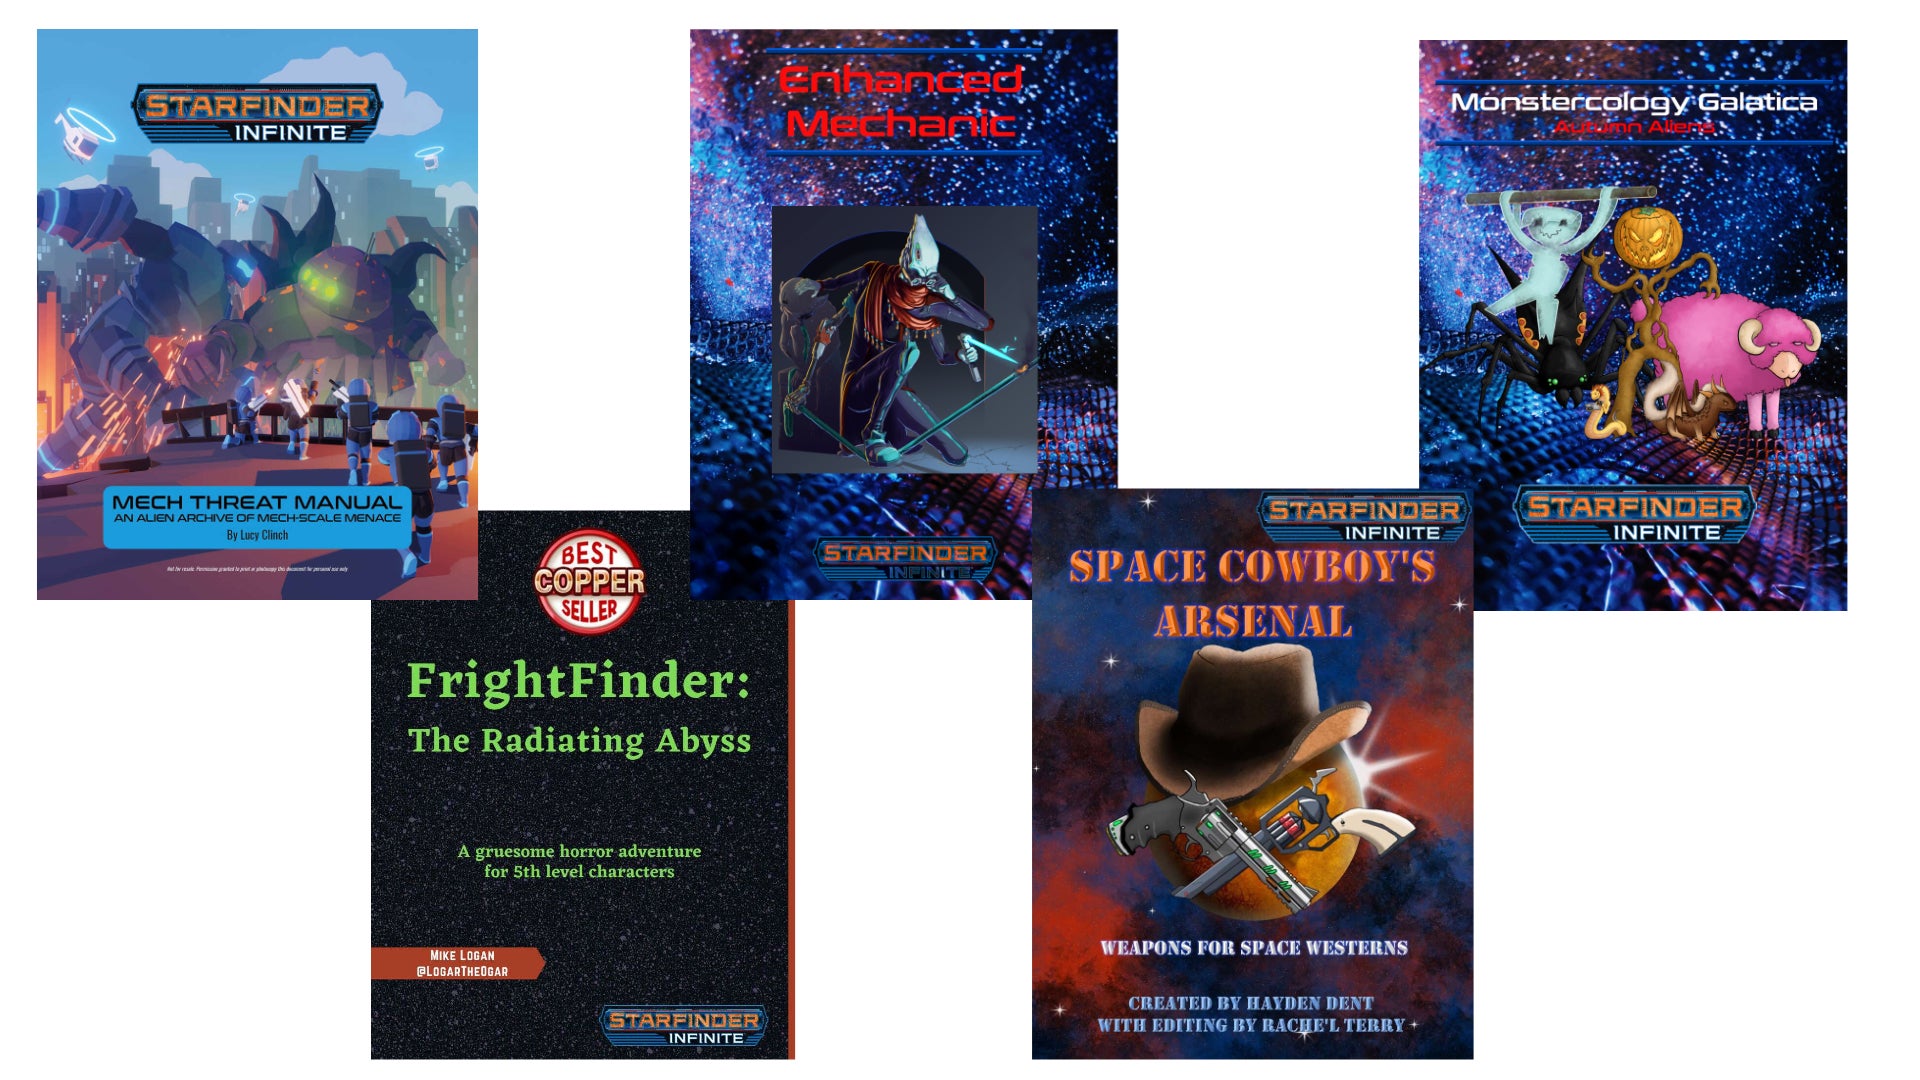 A spread of the covers for the December 2023 Starfinder Infinite Top Performers.